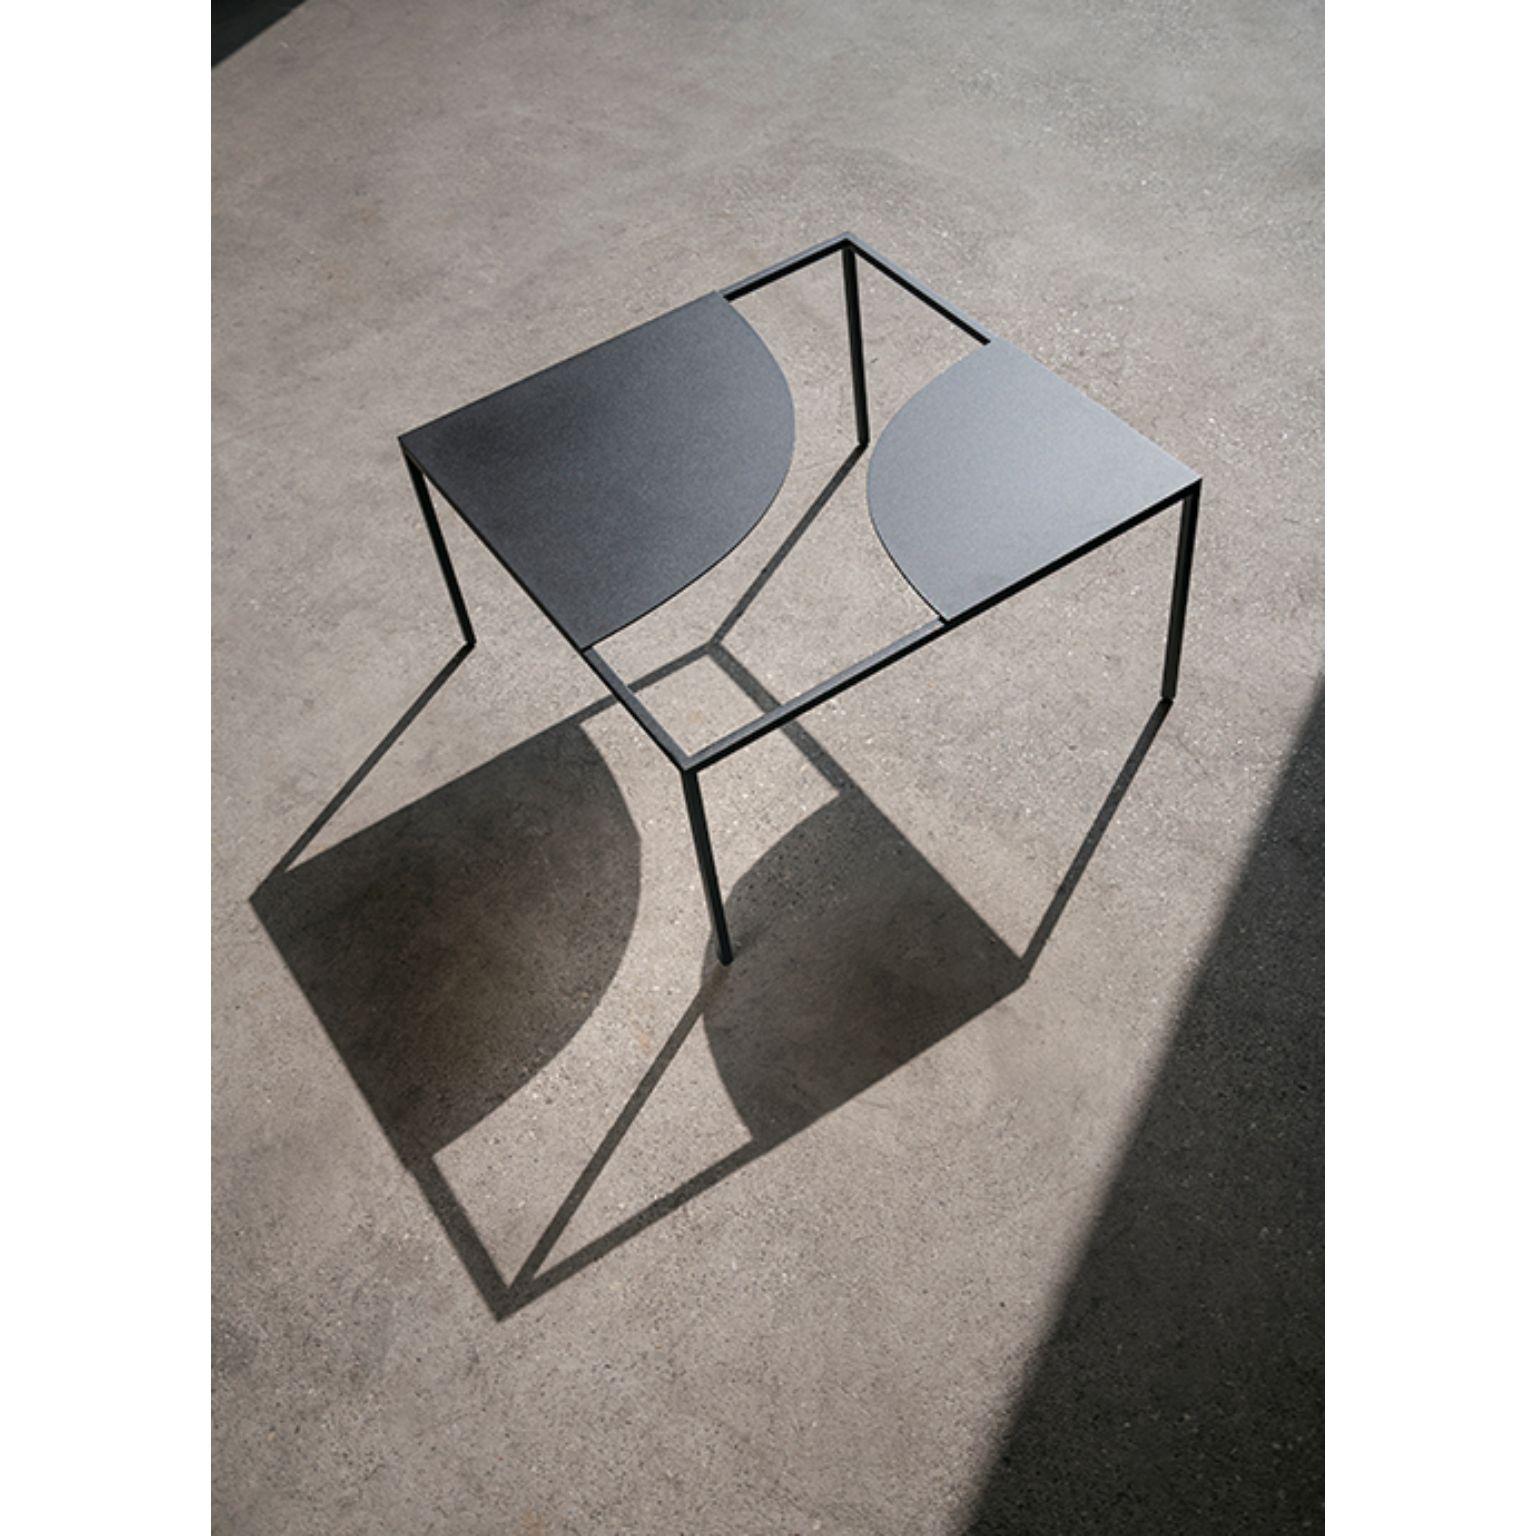 Creek coffee table by Nendo.
Materials: Top: Powder coated metal (Also available in solid wood)
 Structure: Black chrome metal
Dimensions: W 60 x D 60 x H 31.7 cm.

Creek is a table that suggests a stream of water flowing freely across its